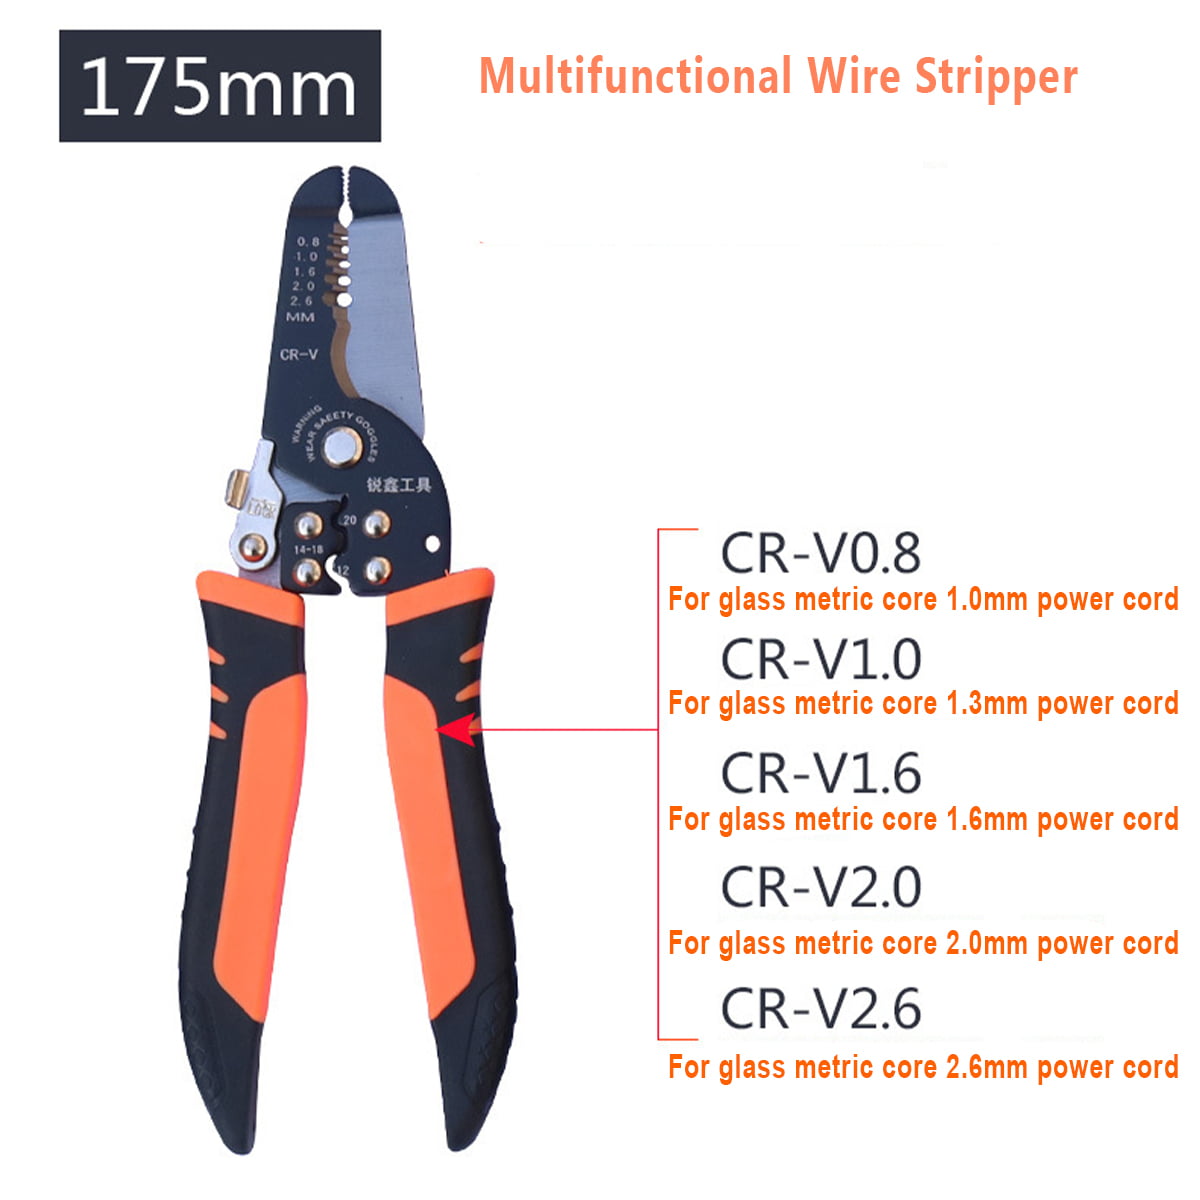 for Crimping Terminals Multi‑Functional Cable Stripper Small Size for Stripping for Cutting Wires 1-6mm Cable Stripper 